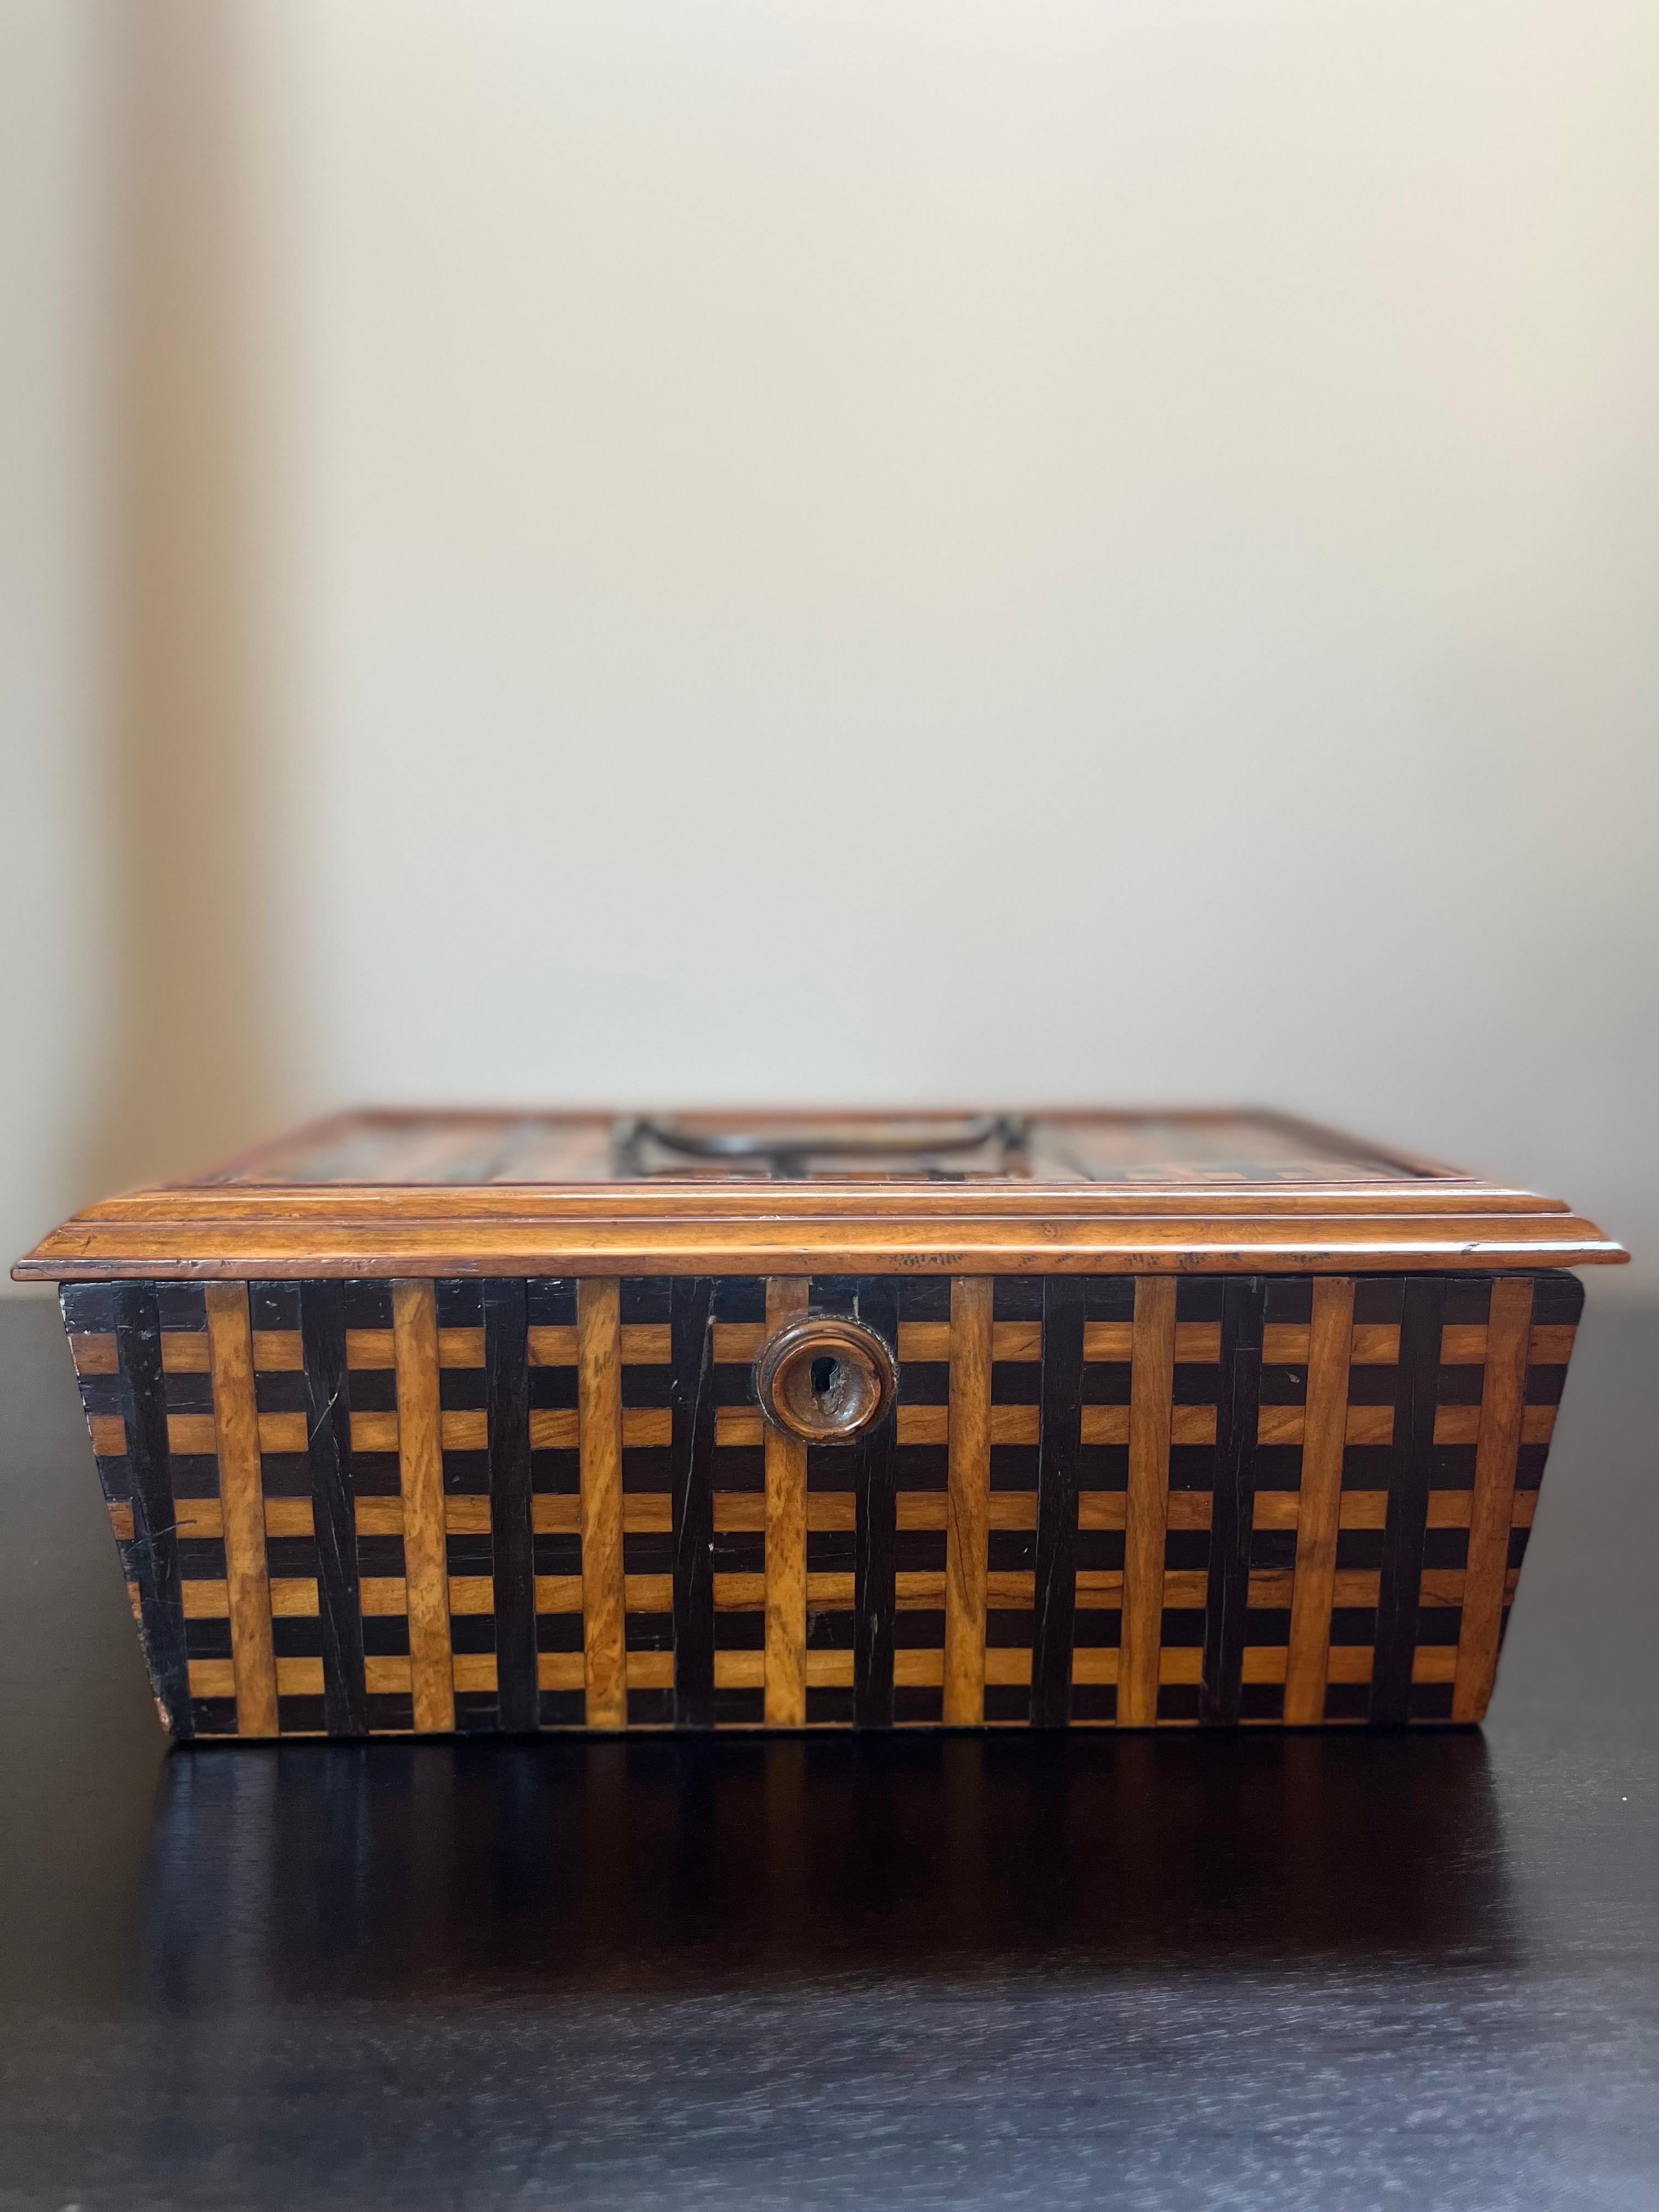 Georgian parquetry box featuring two-toned woven lattice pattern, metal carrying handle, hinged lid and wooden keyhole. Lined with red velvet, this piece of early 19th century English woodwork makes a discreet yet elegant storage unit, as well as